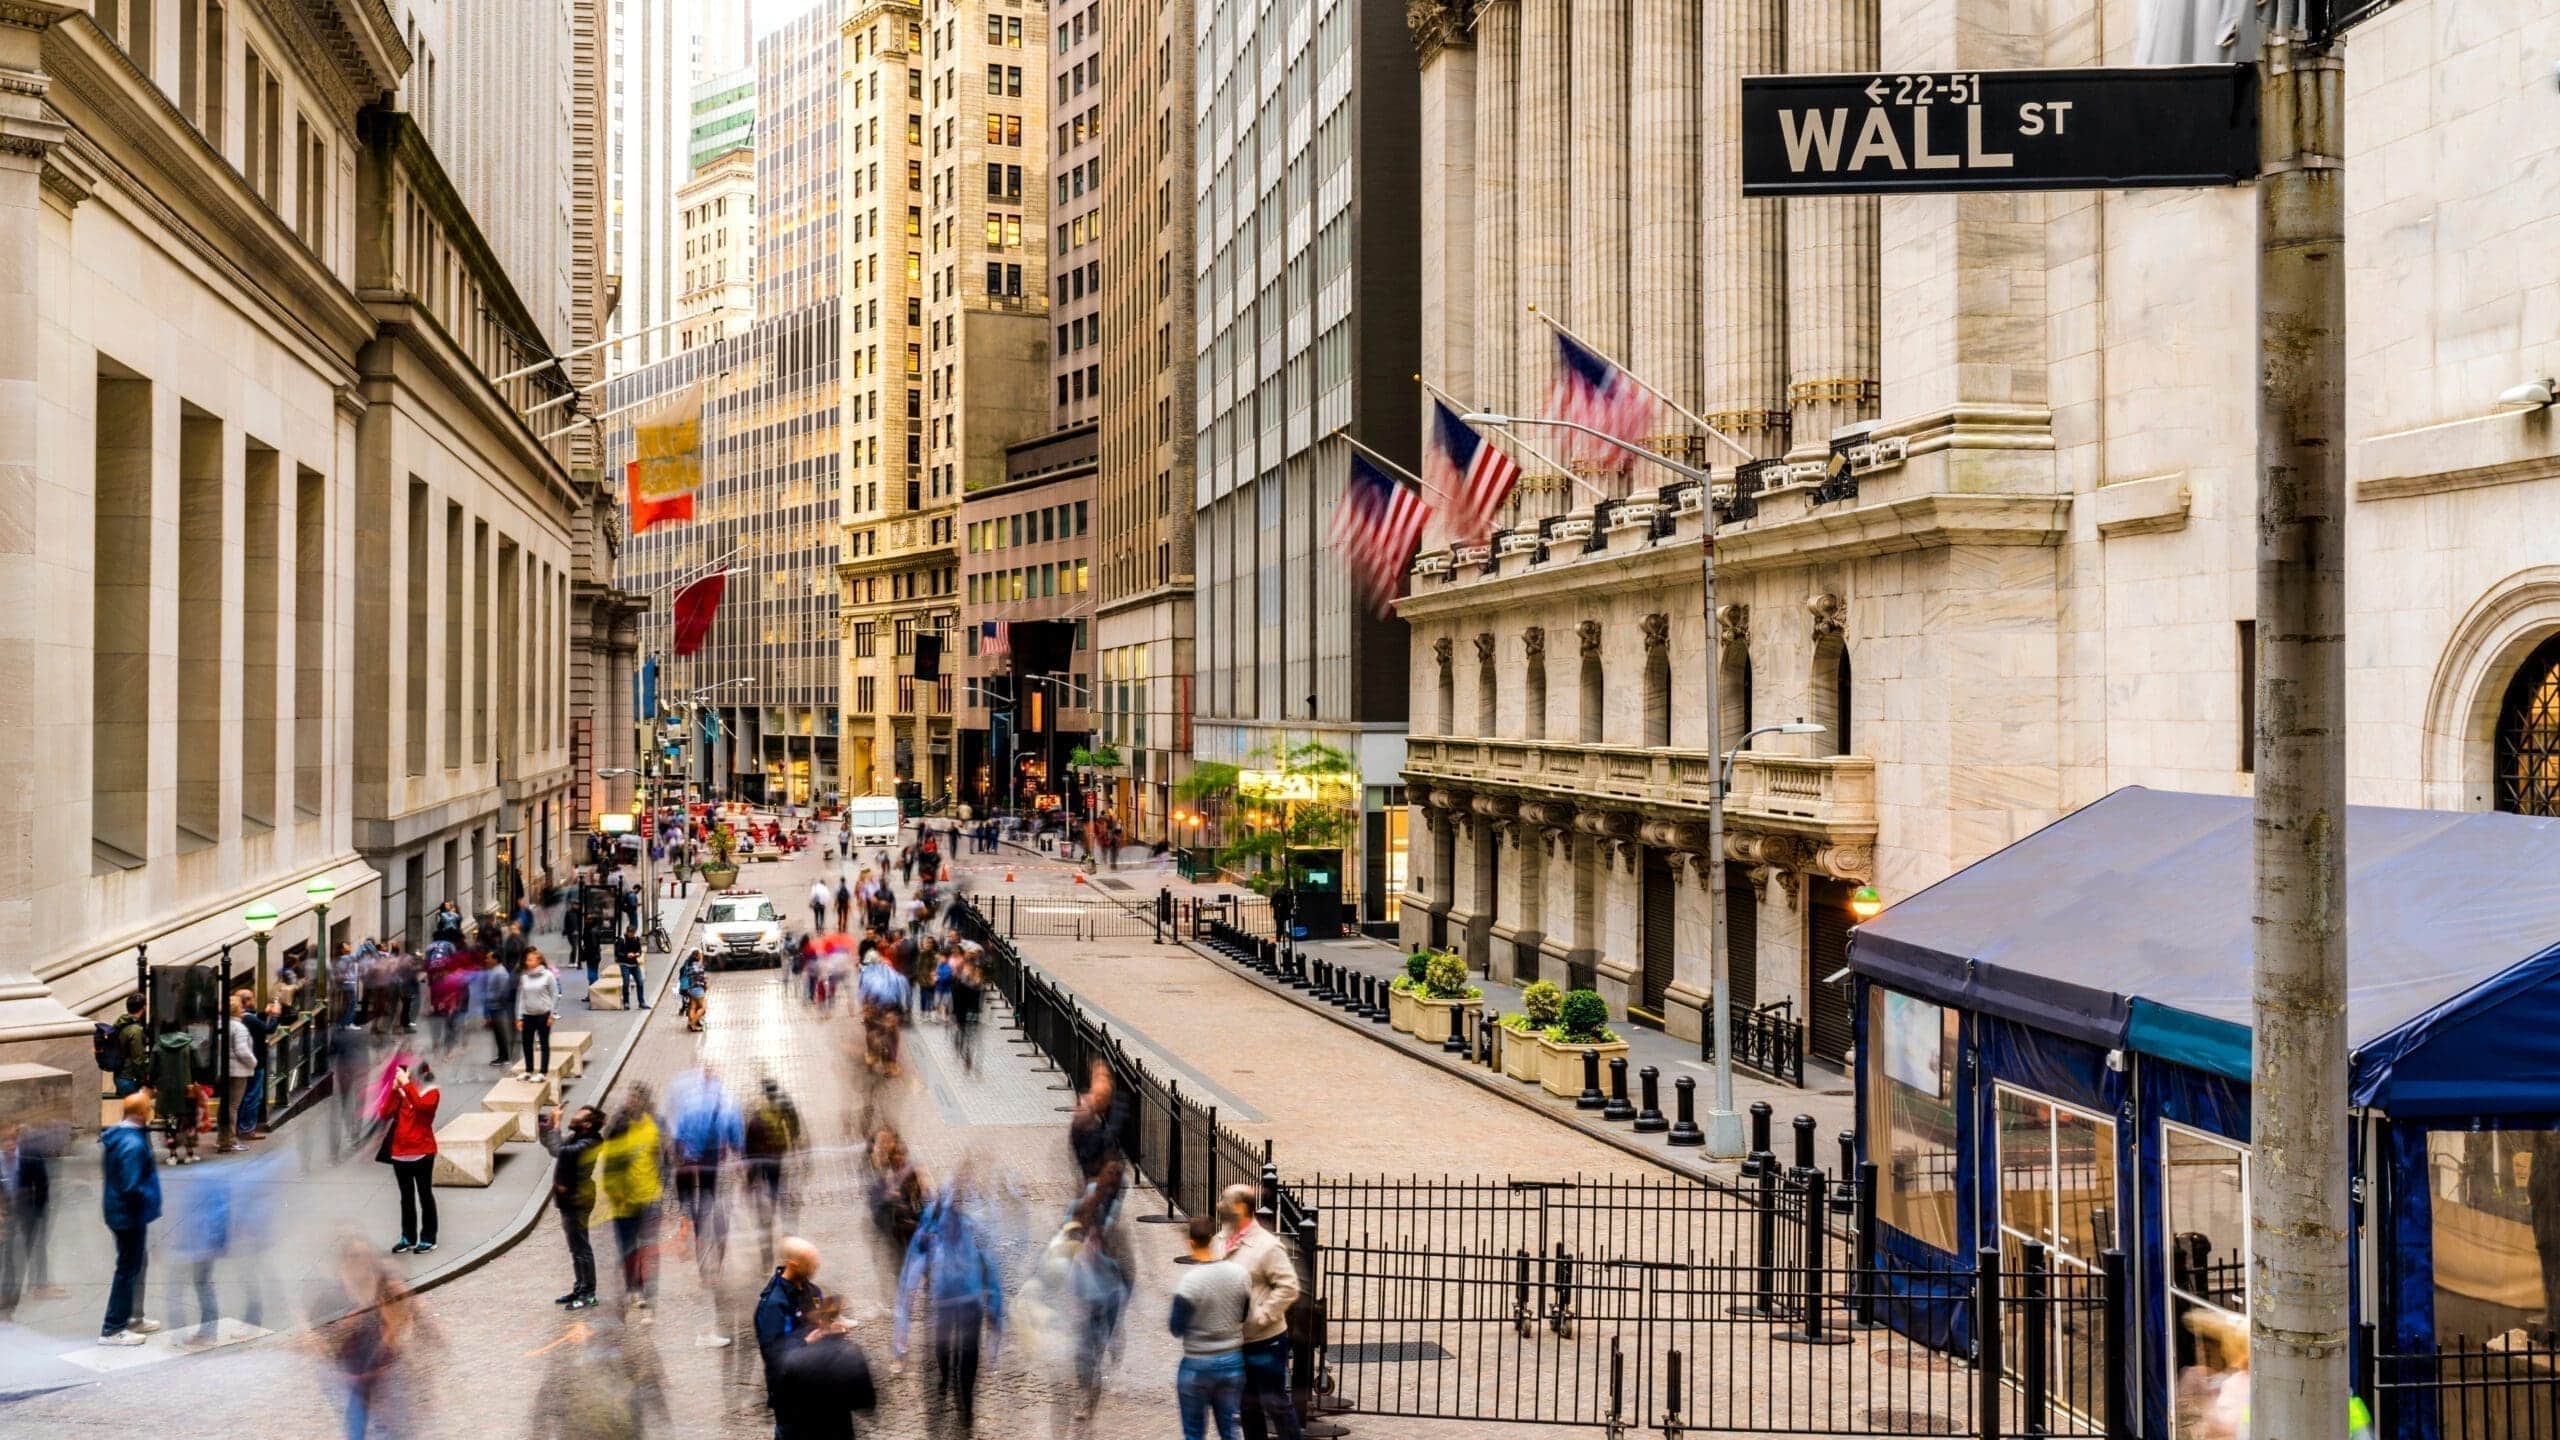 How long does it take to visit Wall Street?